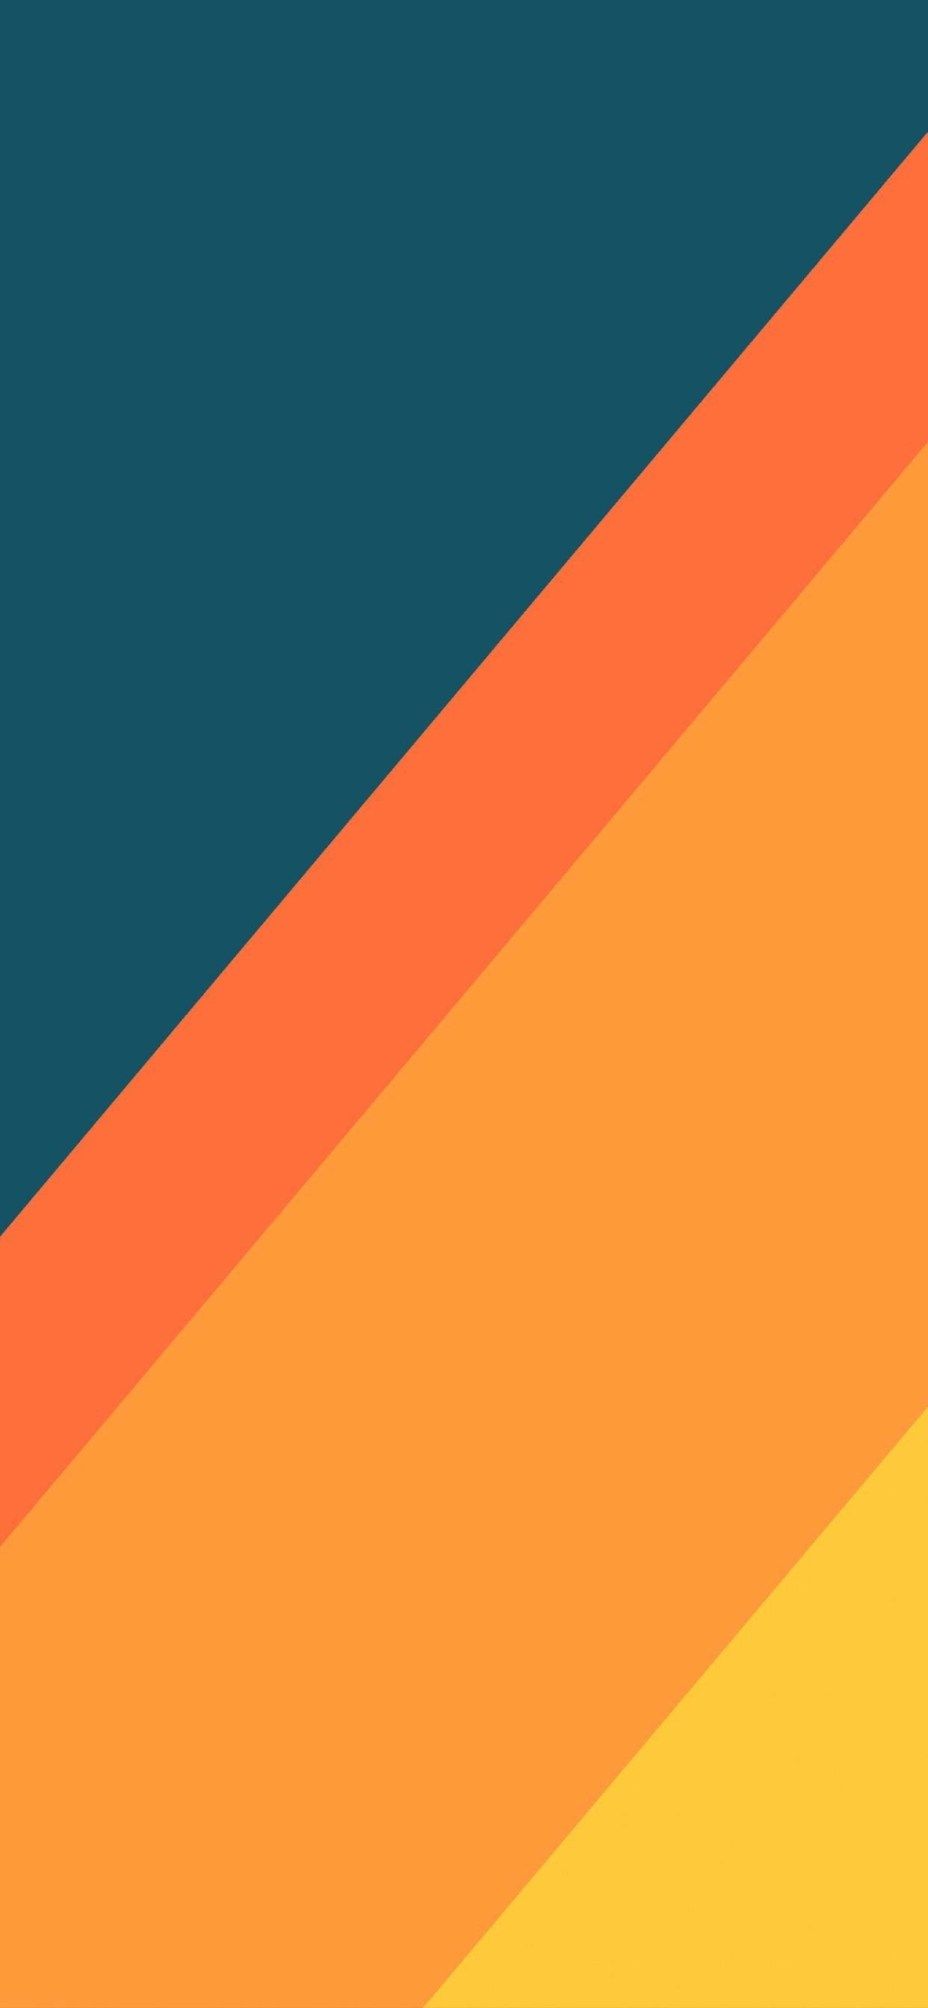 Orange and Blue Abstract Minimalist .wallpaperfortech.com